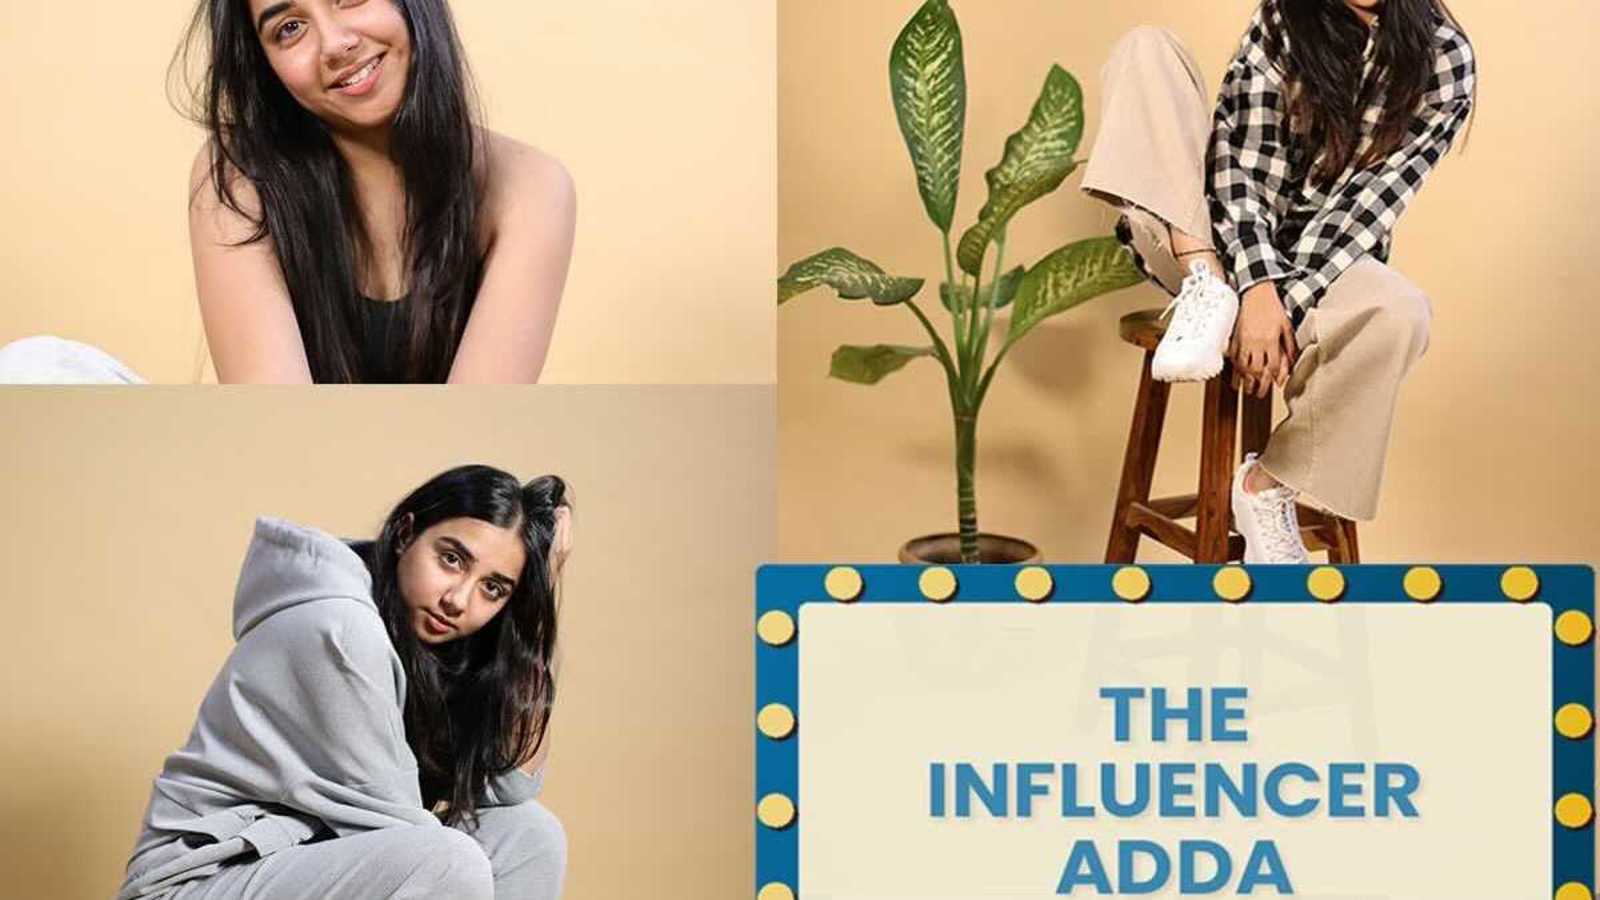 I would never tell a sexist, classist or any kind of phobic content at the  expense of a joke: Prajakta Koli | Business Insider India